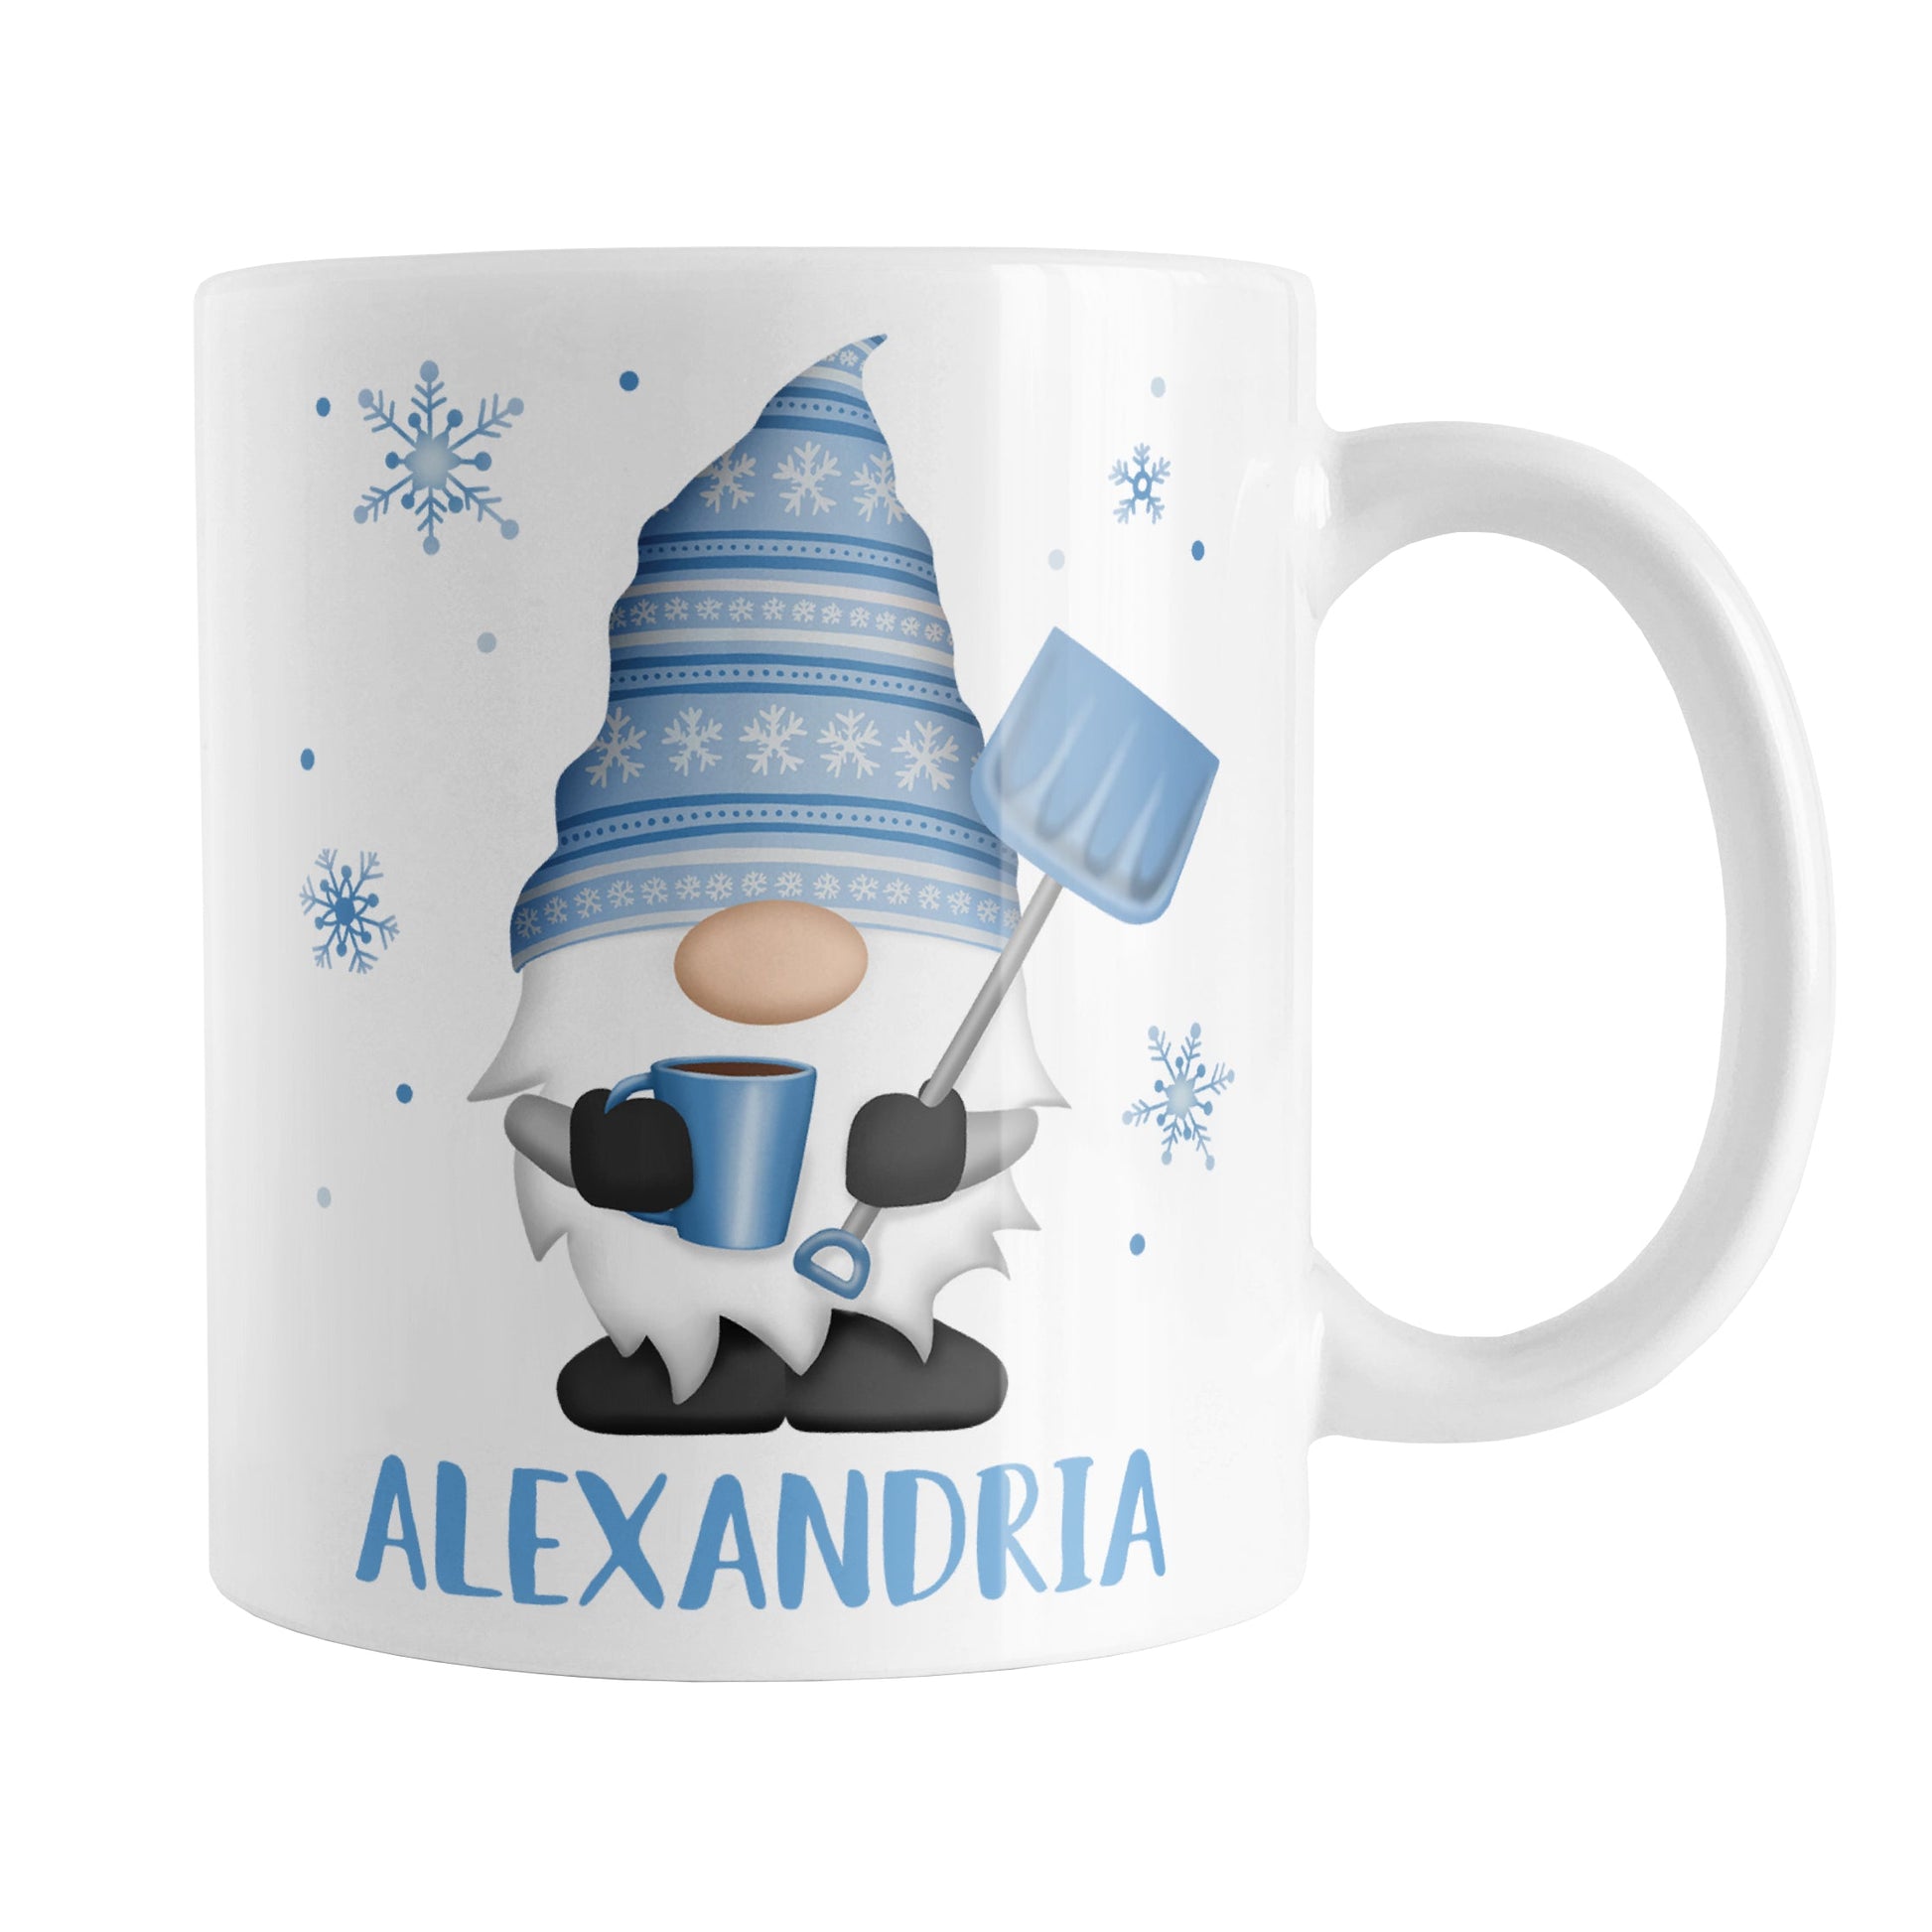 Personalized Winter Snowflake Gnome Mug (11oz) at Amy's Coffee Mugs. A ceramic coffee mug designed with a gnome on both sides of the mug wearing a festive blue snowflake hat and holding a hot beverage and a snow shovel, with snowflakes around it. Your name is custom printed in blue below the gnome.